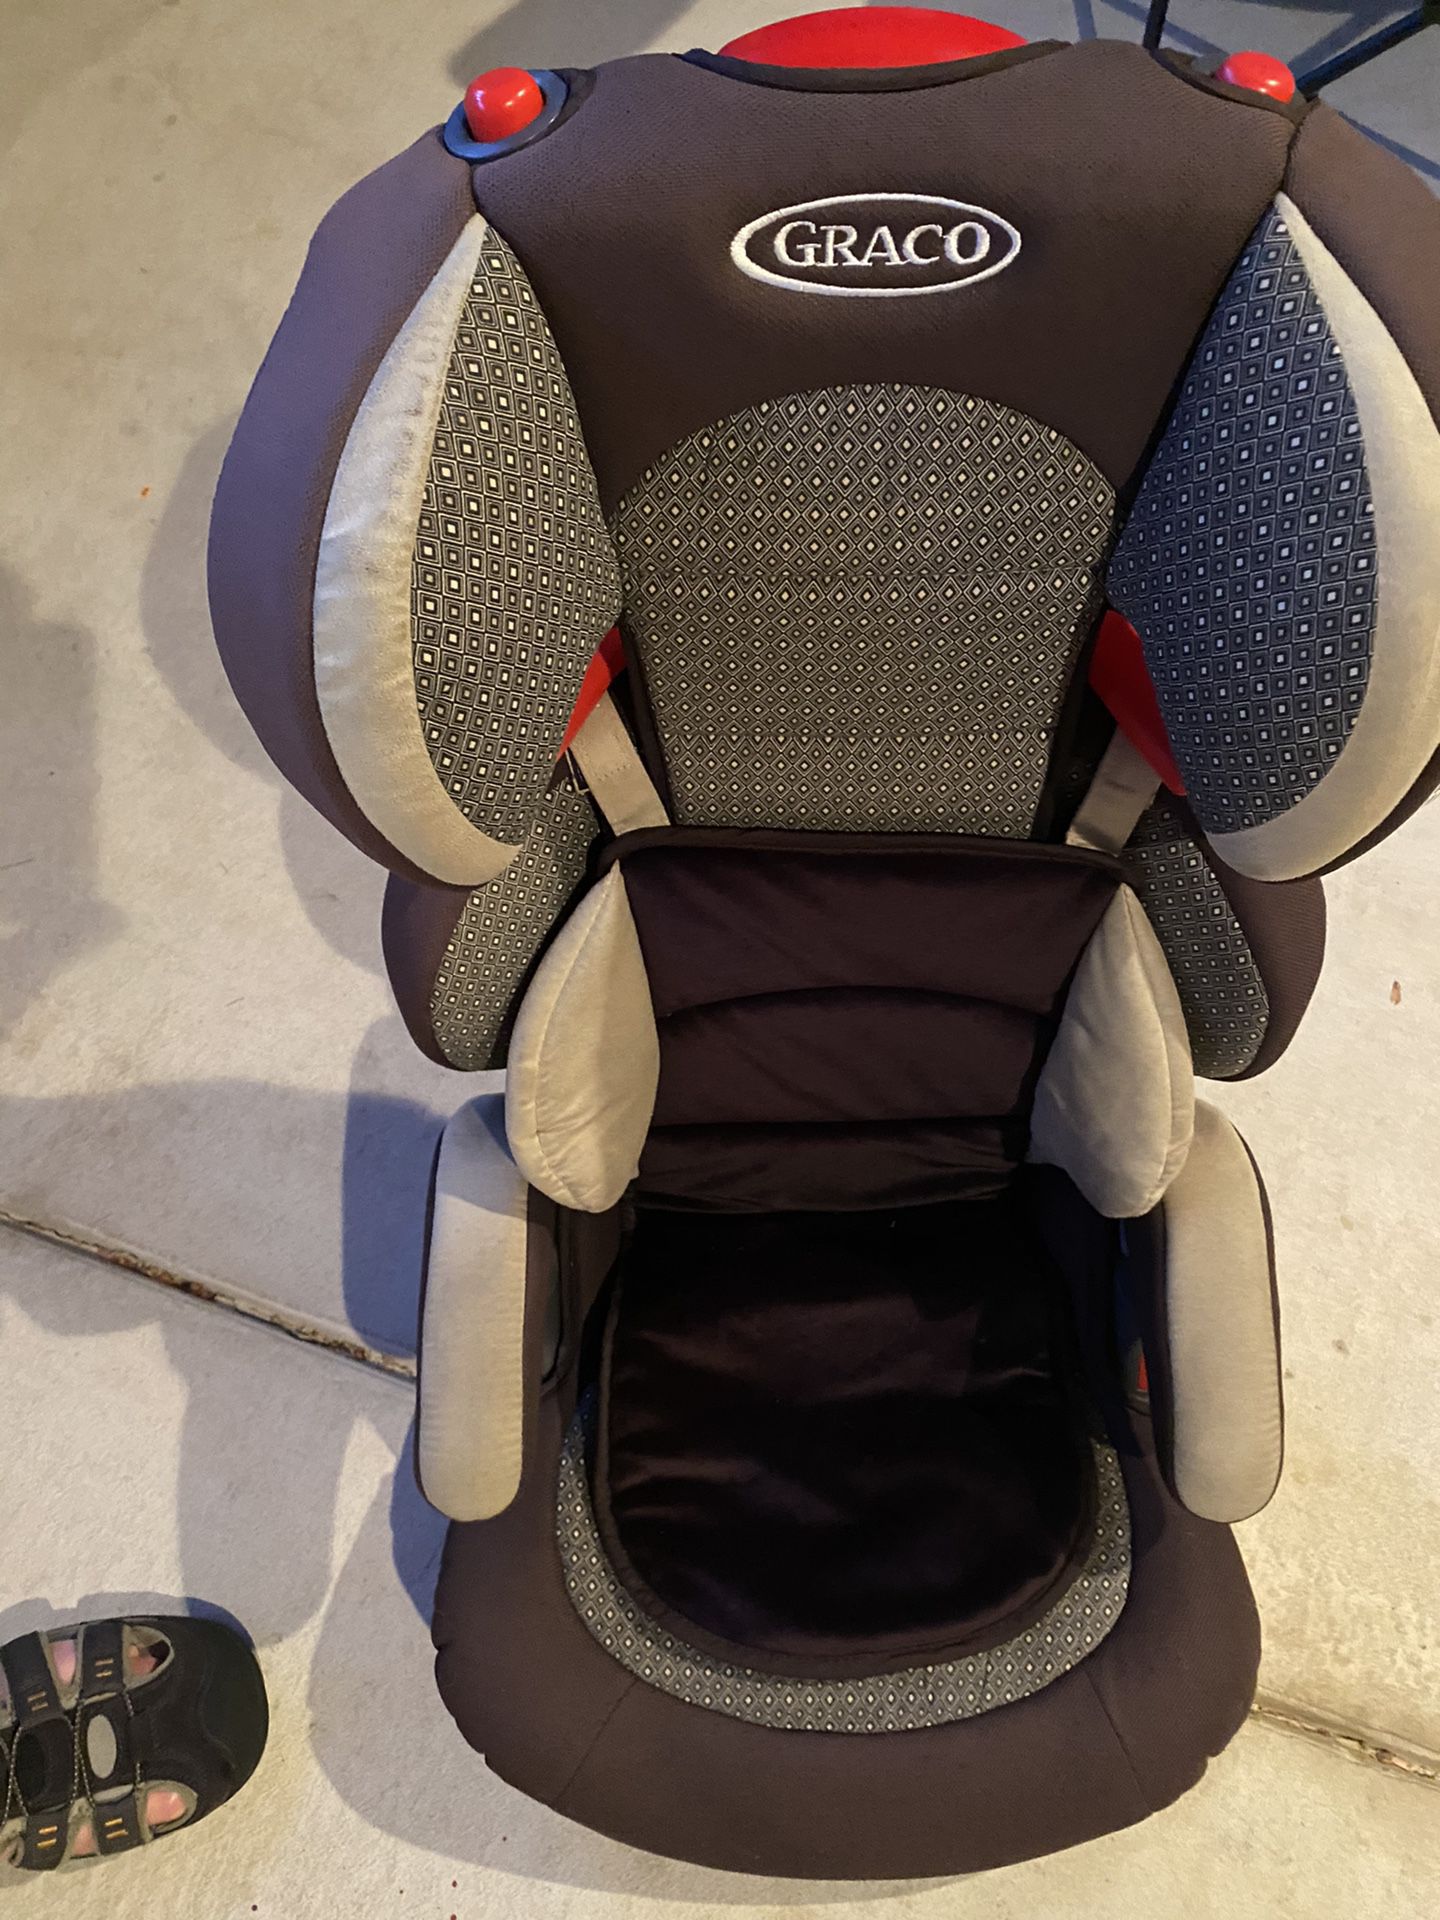 Graco child car seat in very good condition.